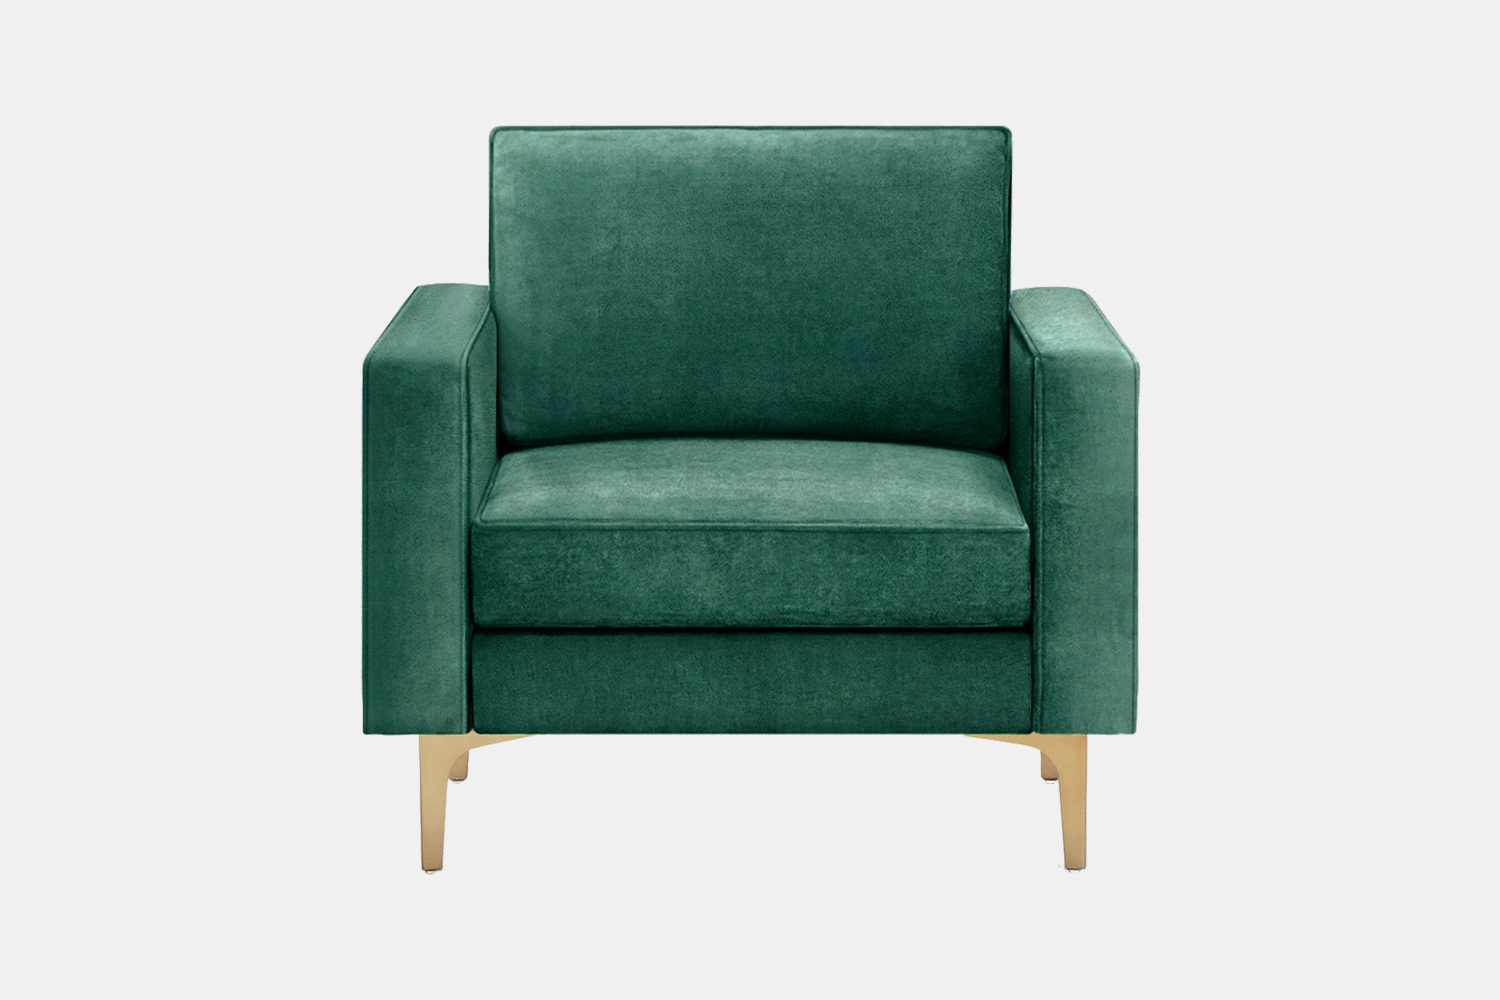 The Burrow Nomad Velvet Armchair in green with metal legs